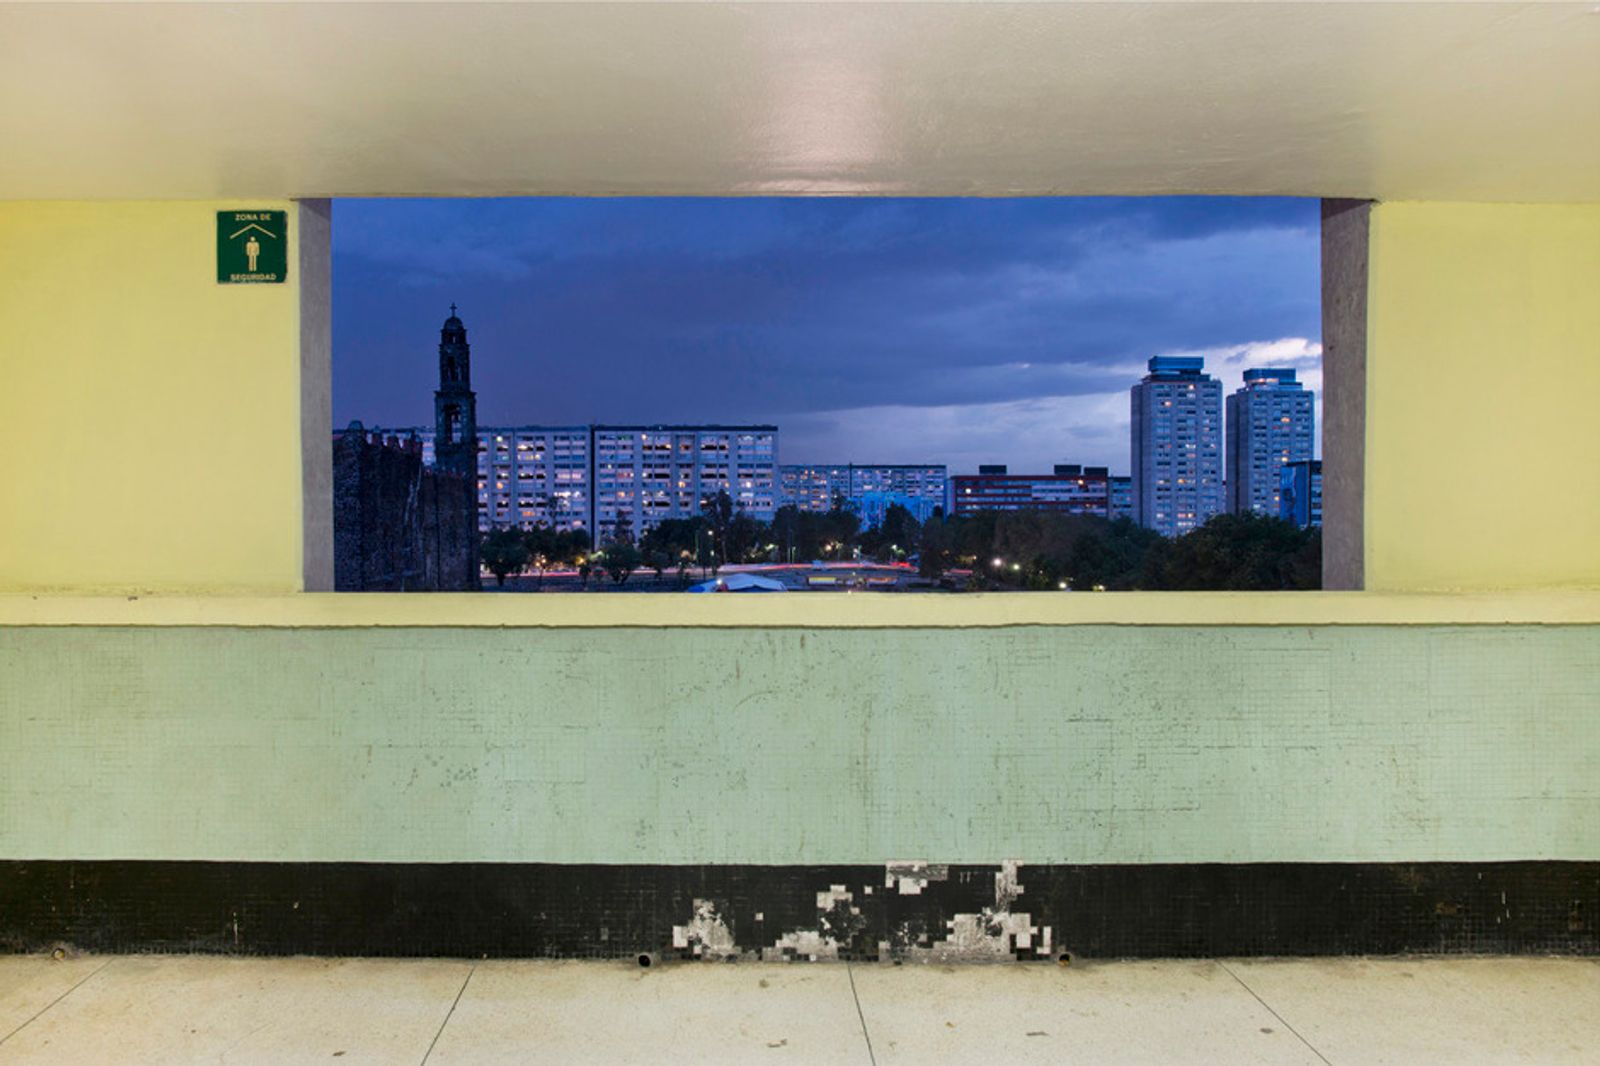 © Adam Wiseman - Image from the Windows of Tlatelolco photography project